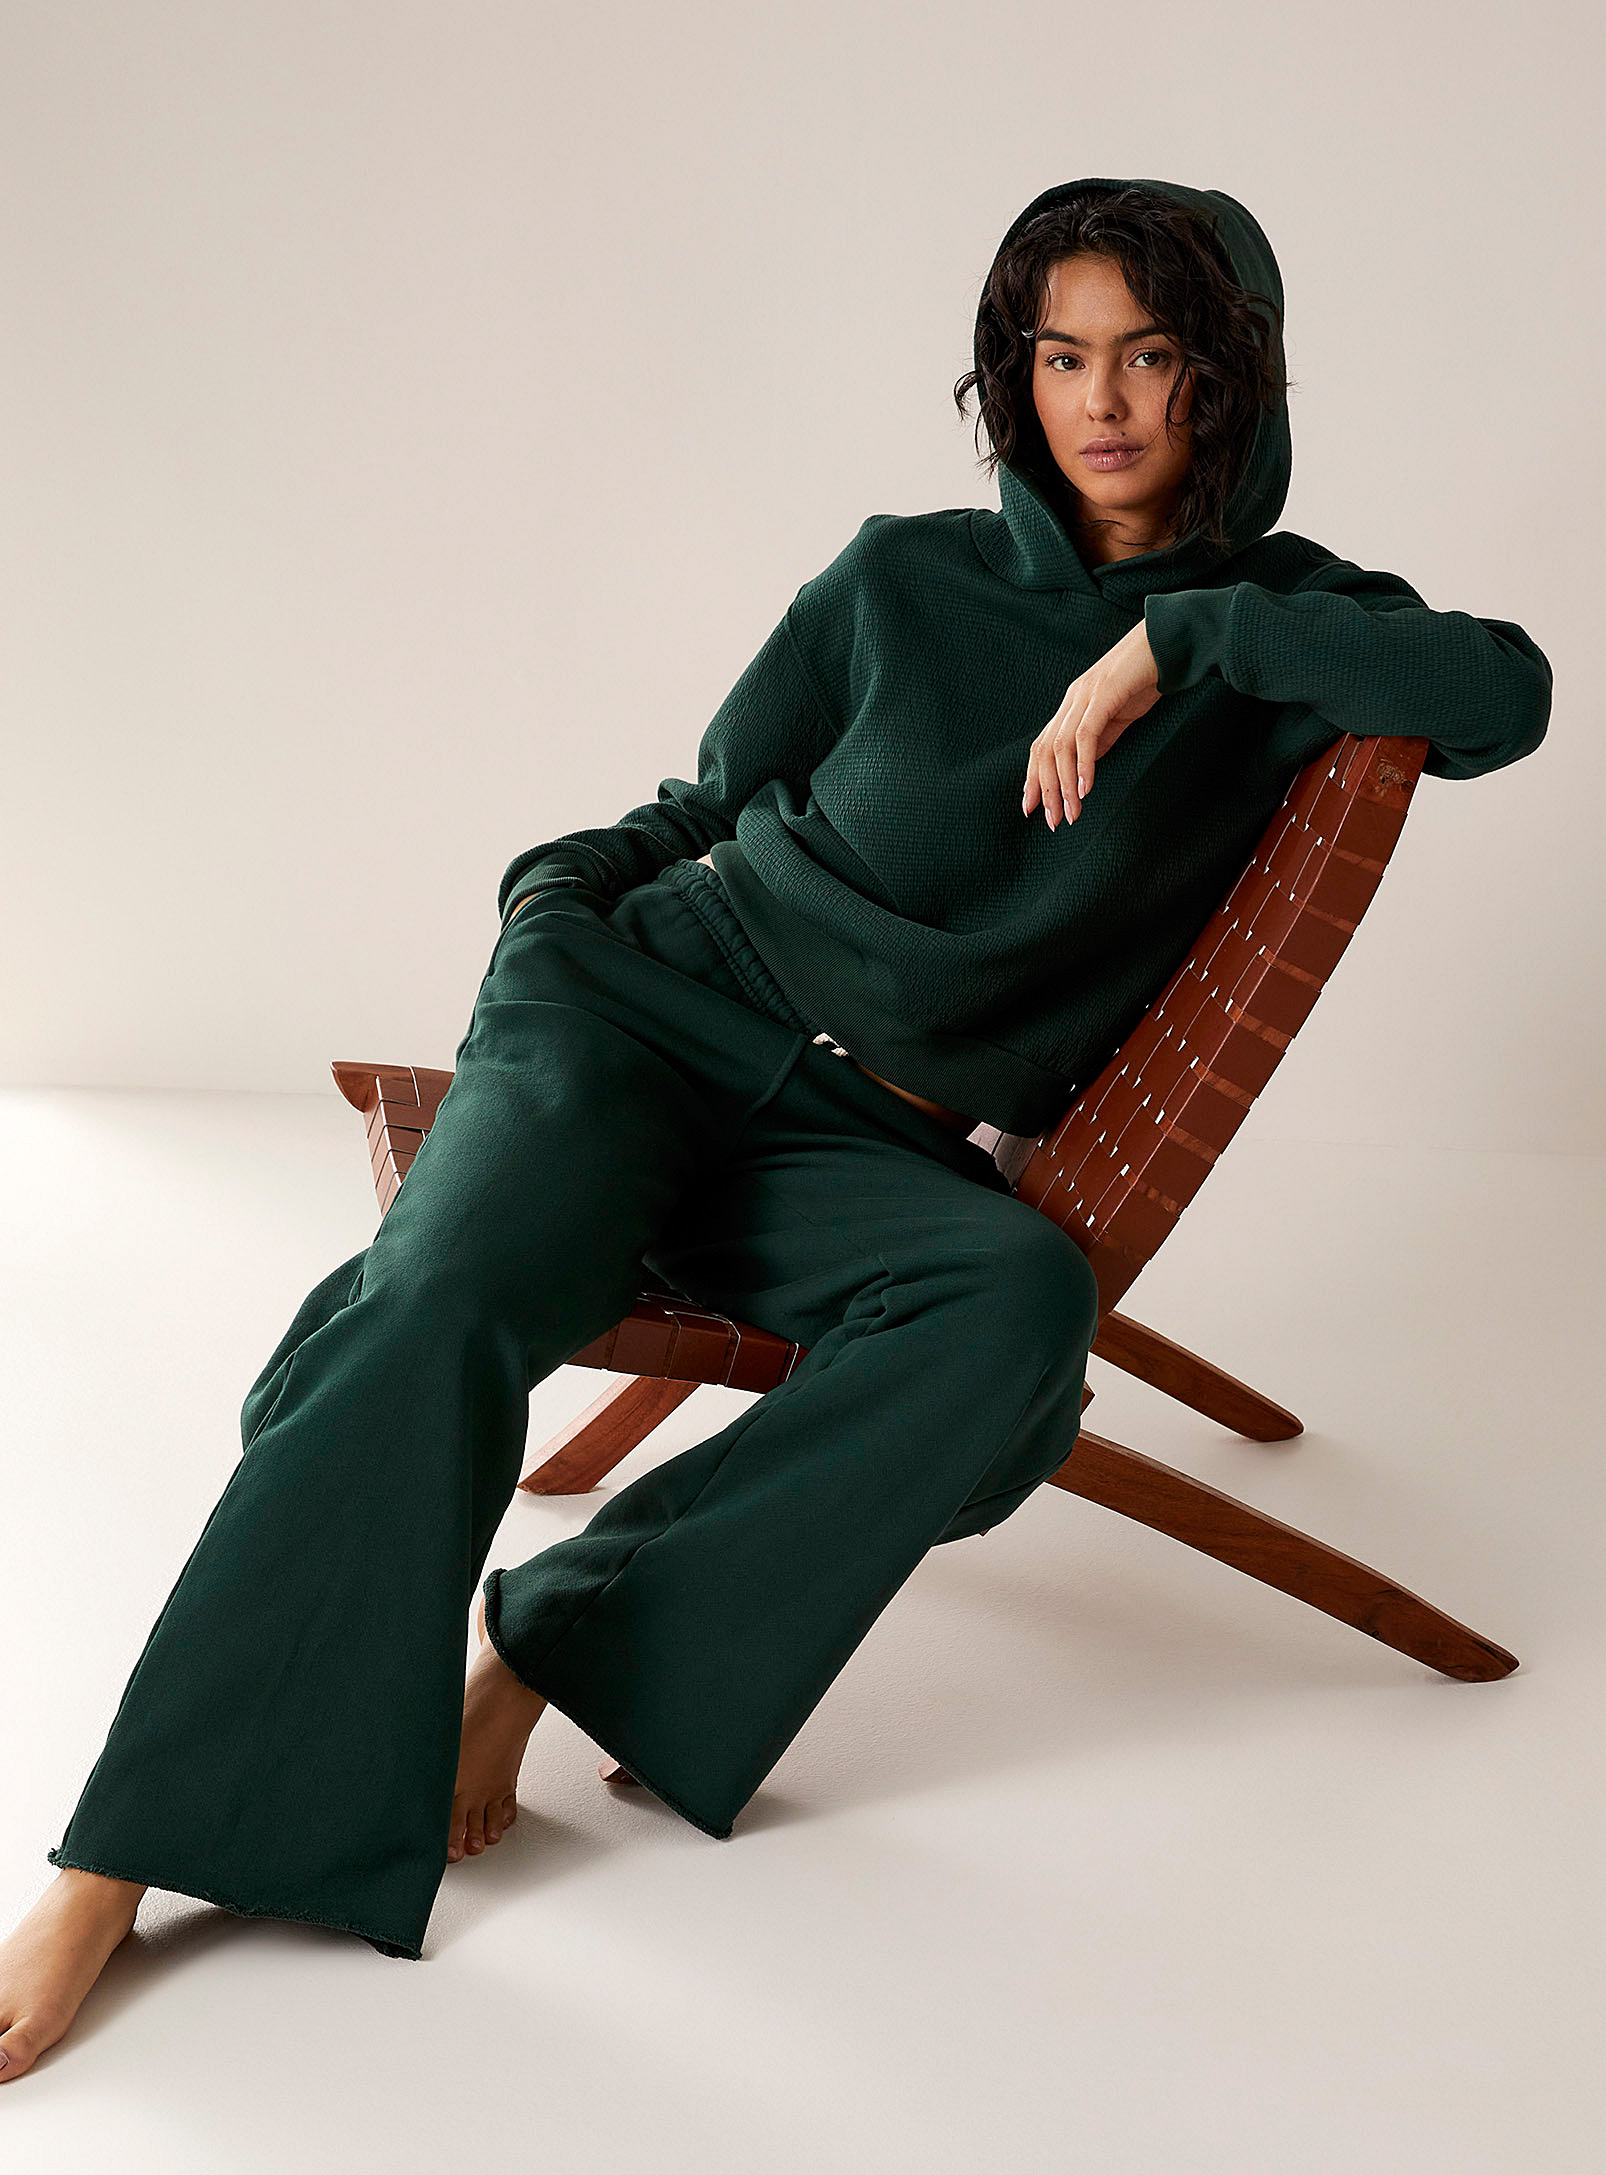 PerfectwhiteTee Shirt - Women's Hailey forest green lounge pant